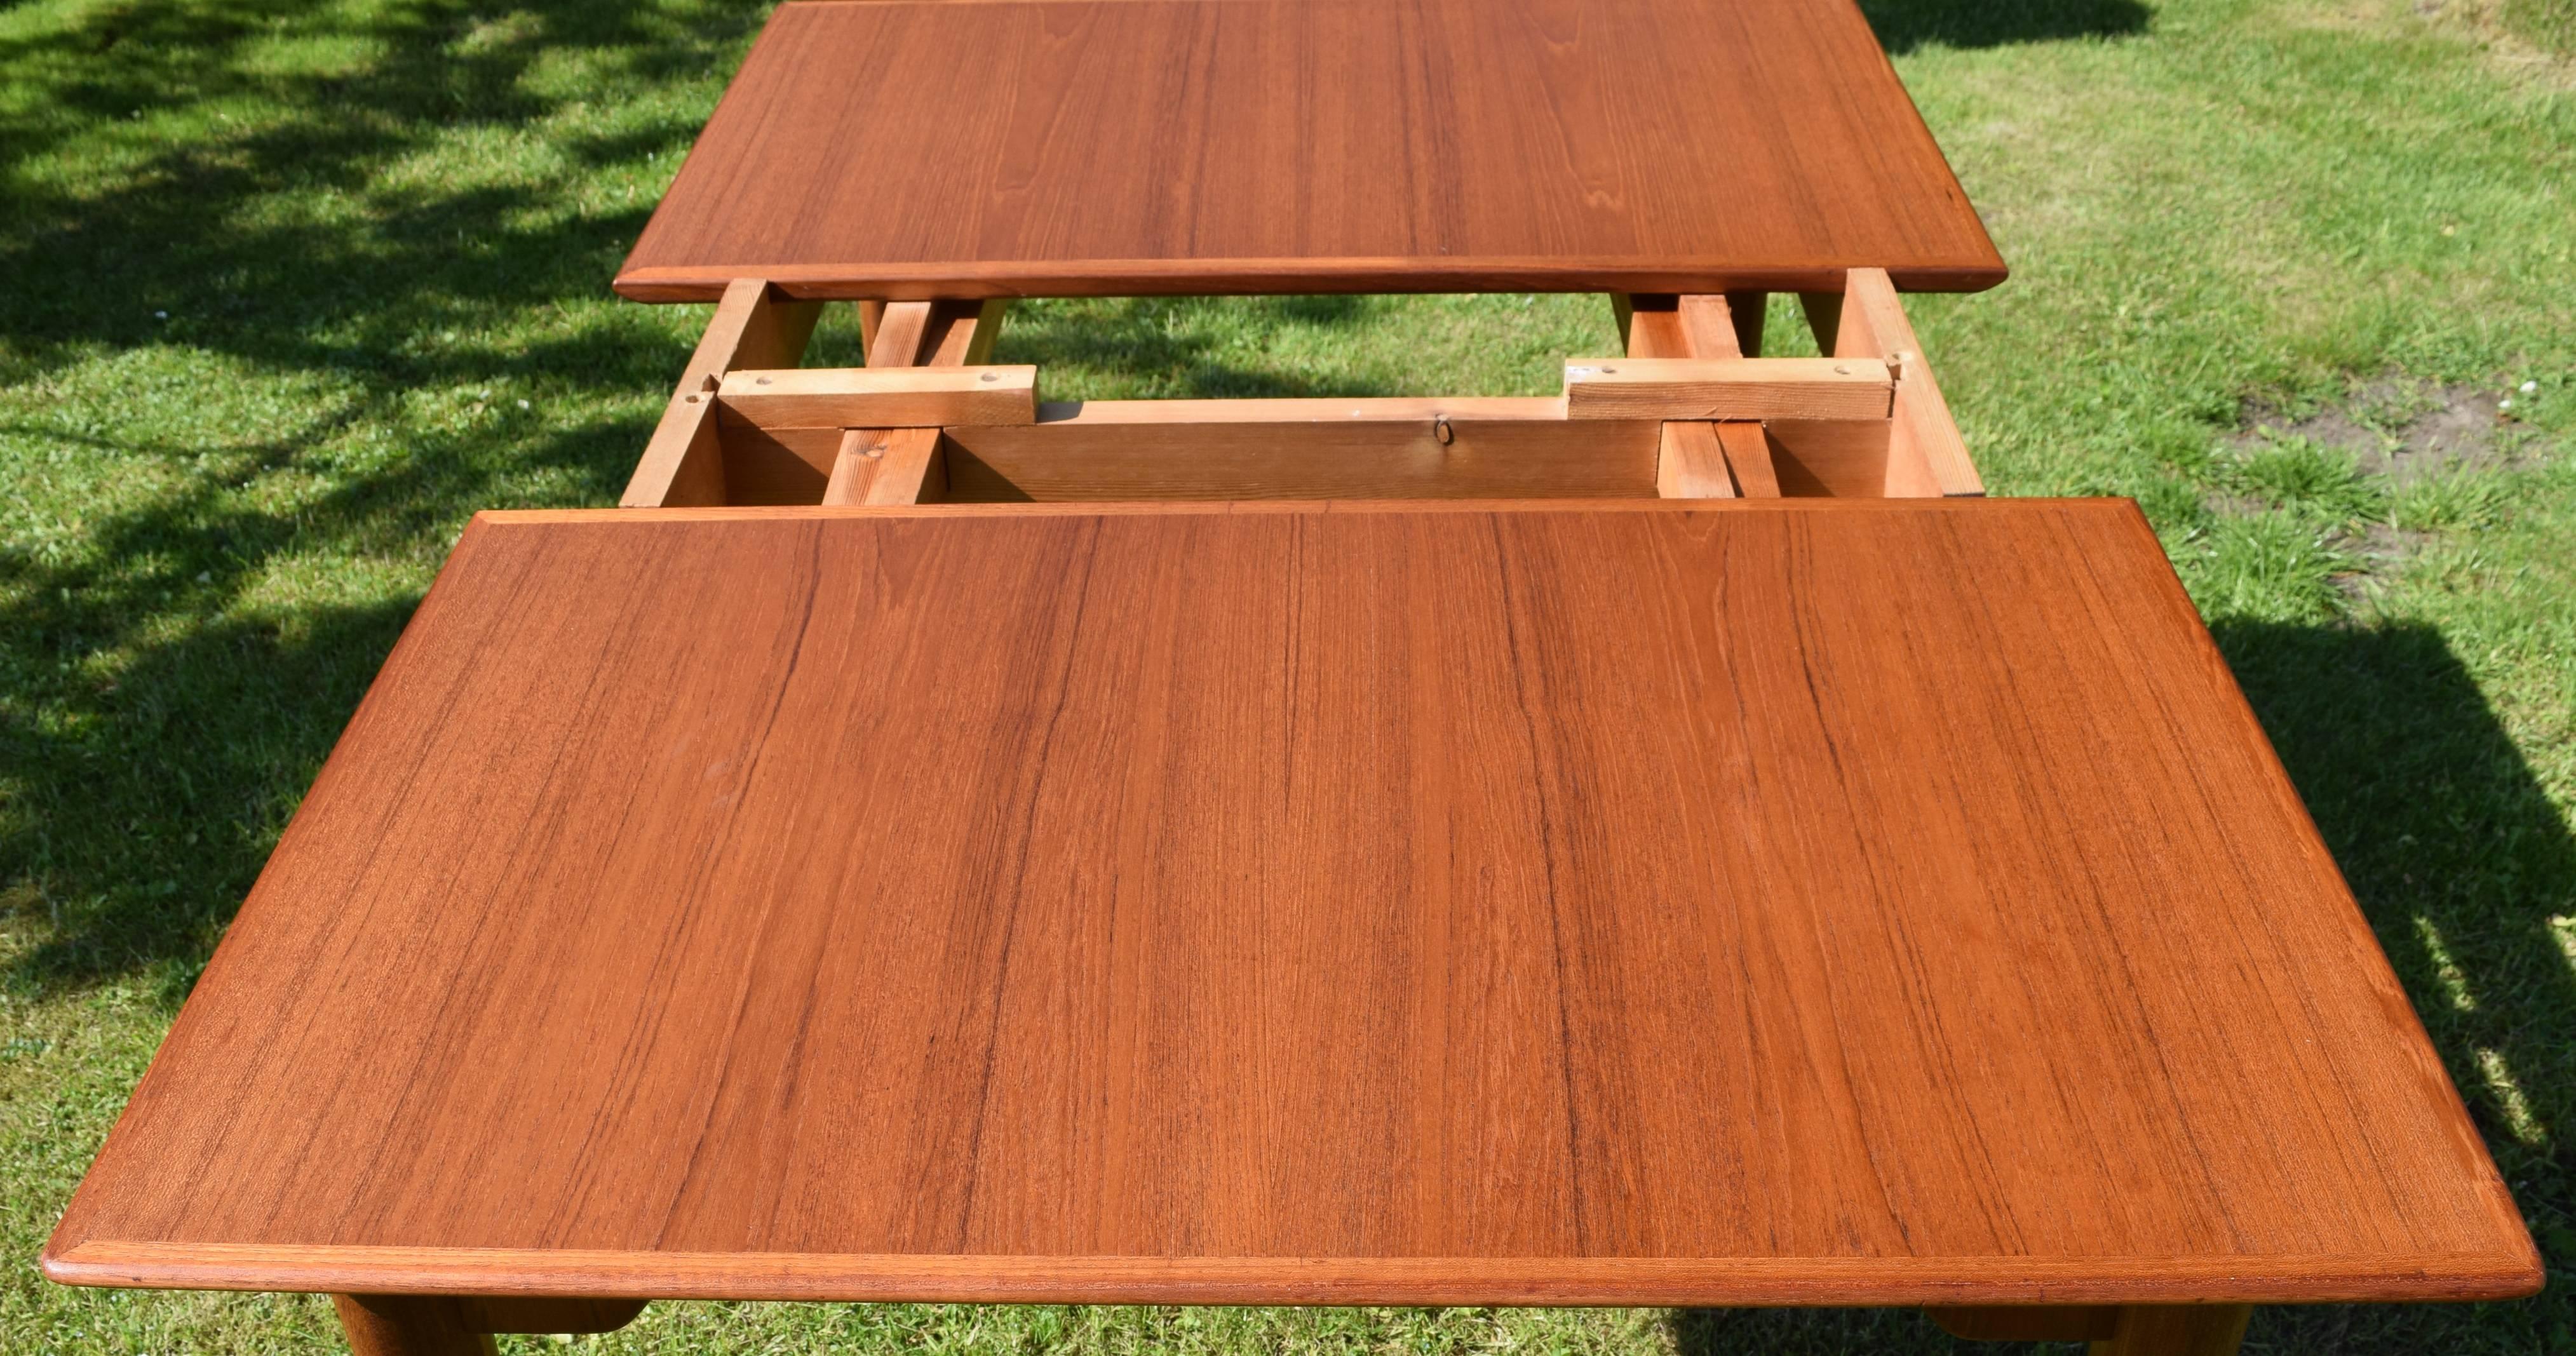 Teak dining table with extension plates manufactured in Denmark in the 1960s. The table features elegant turned and tapered legs. The splayed legs give the table a form reminiscent of designs by Poul Volther from the same period. There are very few